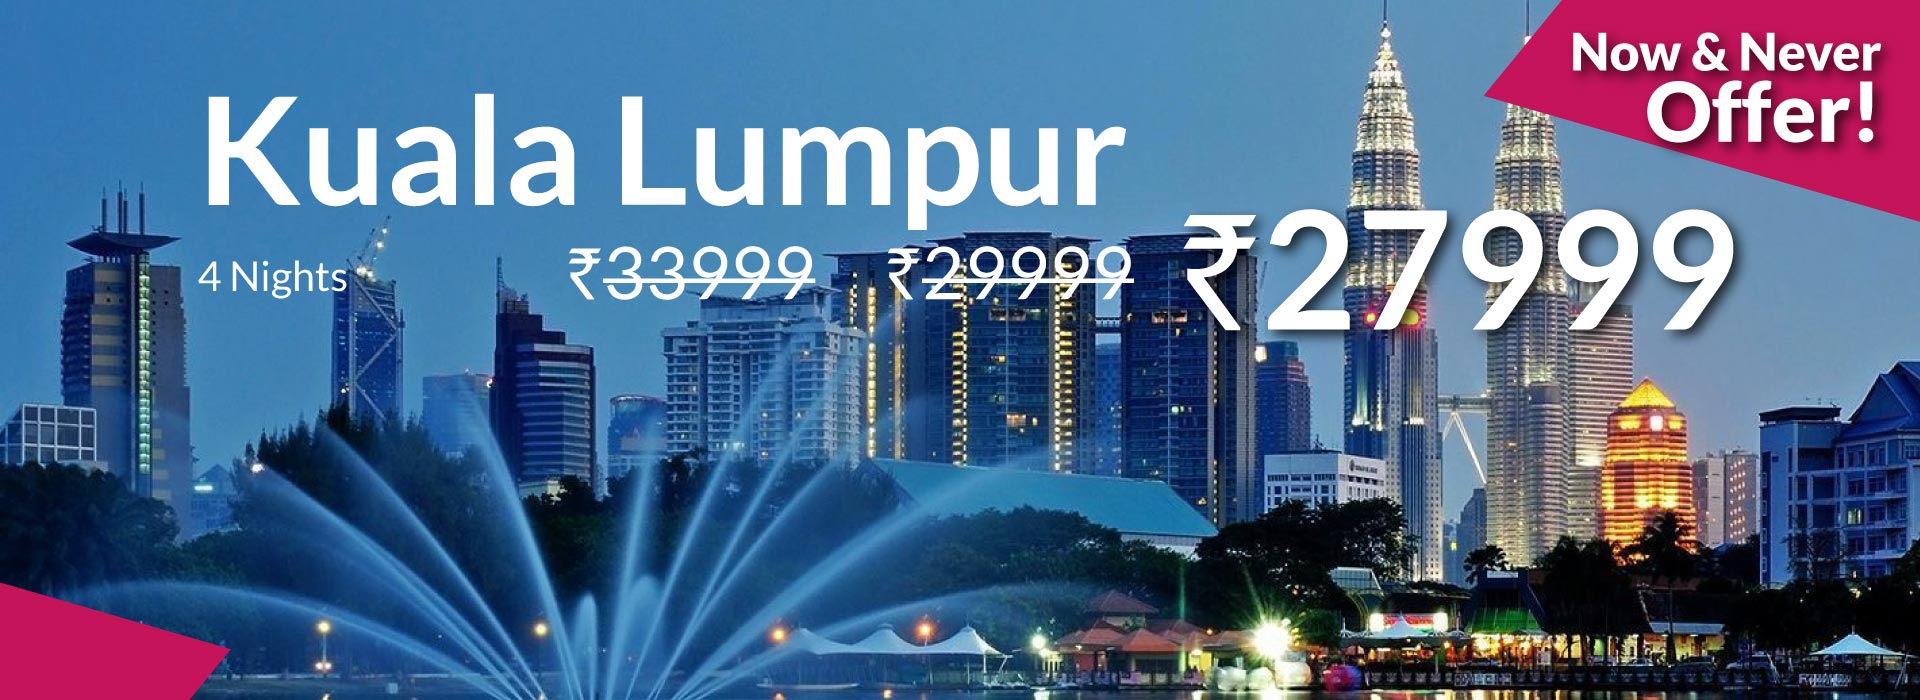 Kuala Lumpur All inclusive Holiday Deal Package on Dpauls.com